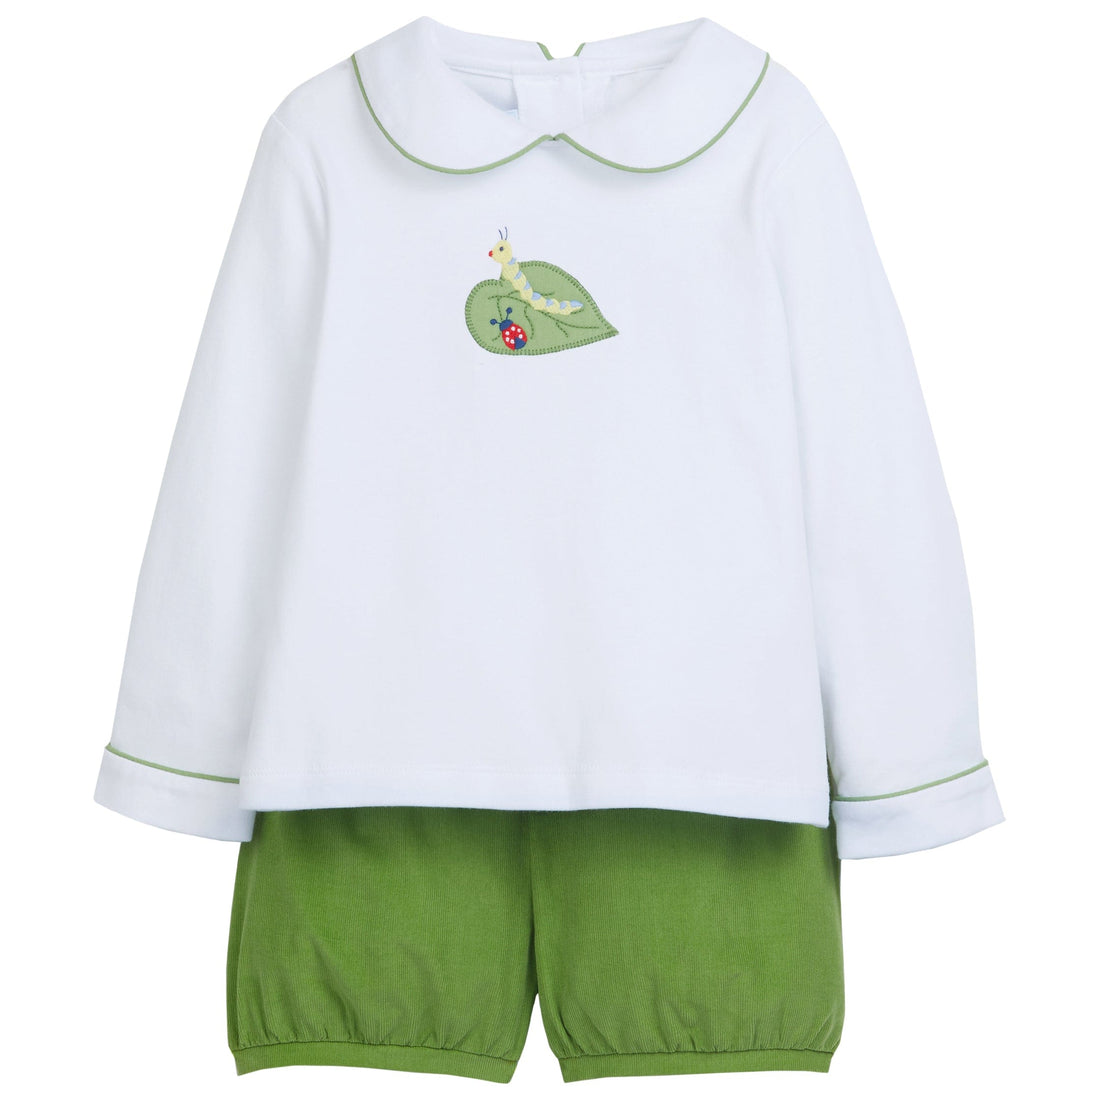 little english classic childrens clothing boys shirt and short set with caterpillar motif on shirt